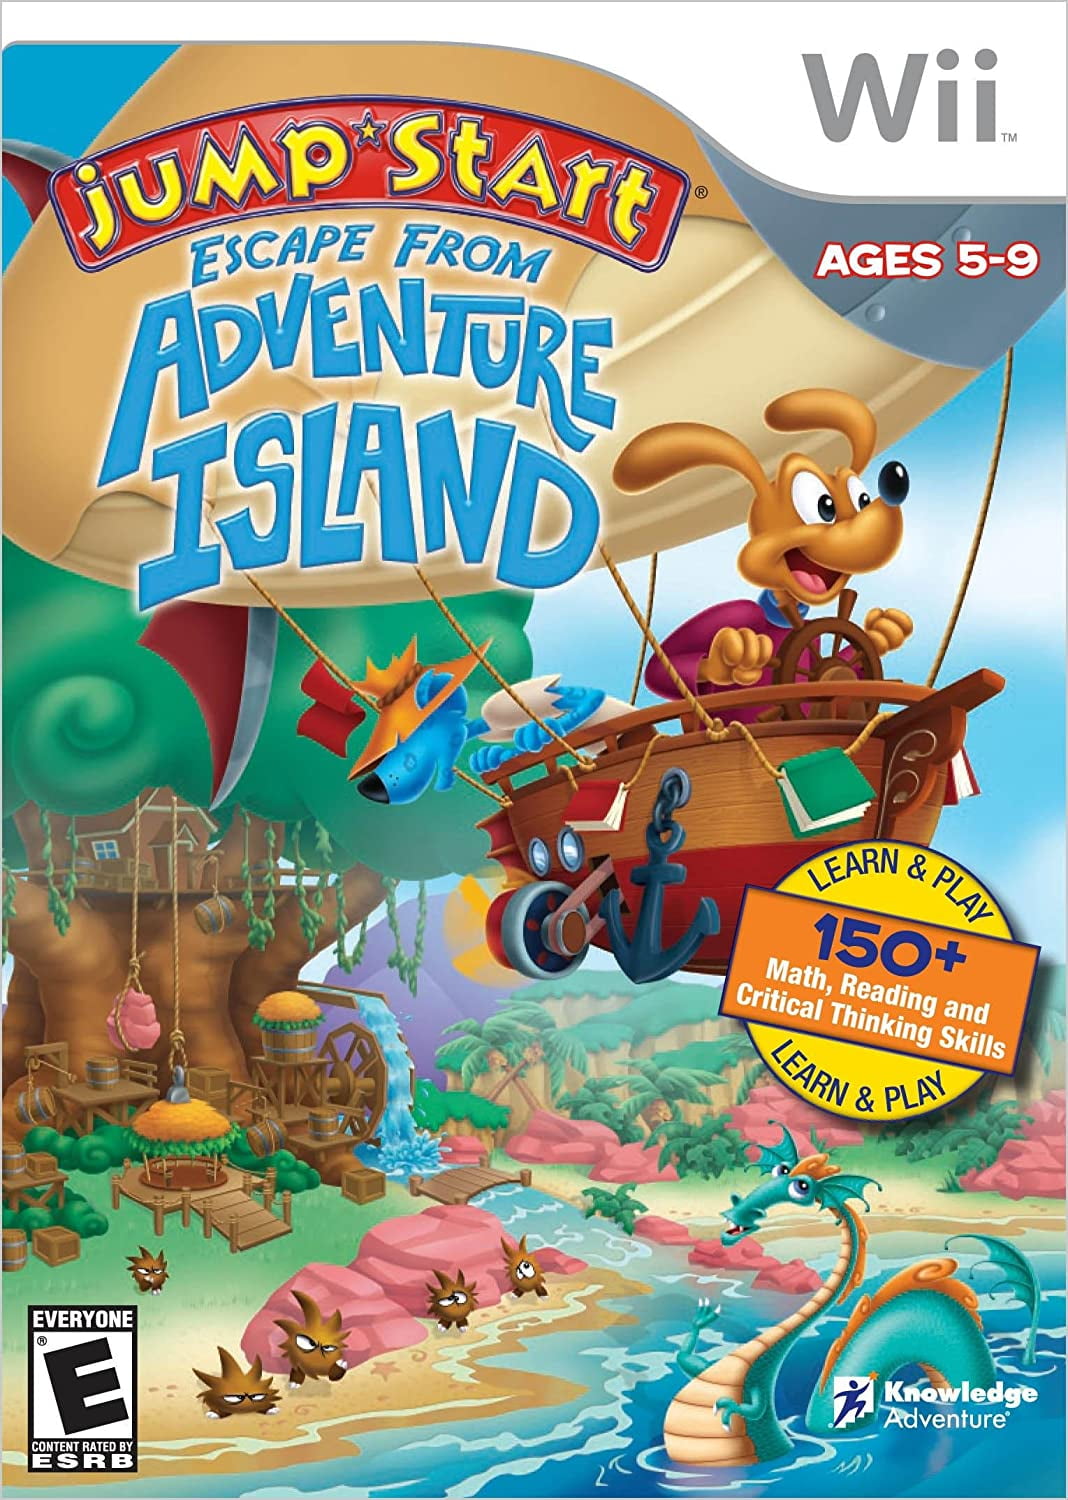 Jumpstart Escape Adventure Island Nintendo Wii First True Educational Product For The Wii For Kids Ages 5 9 By Brand Knowledge Adventure Walmart Com